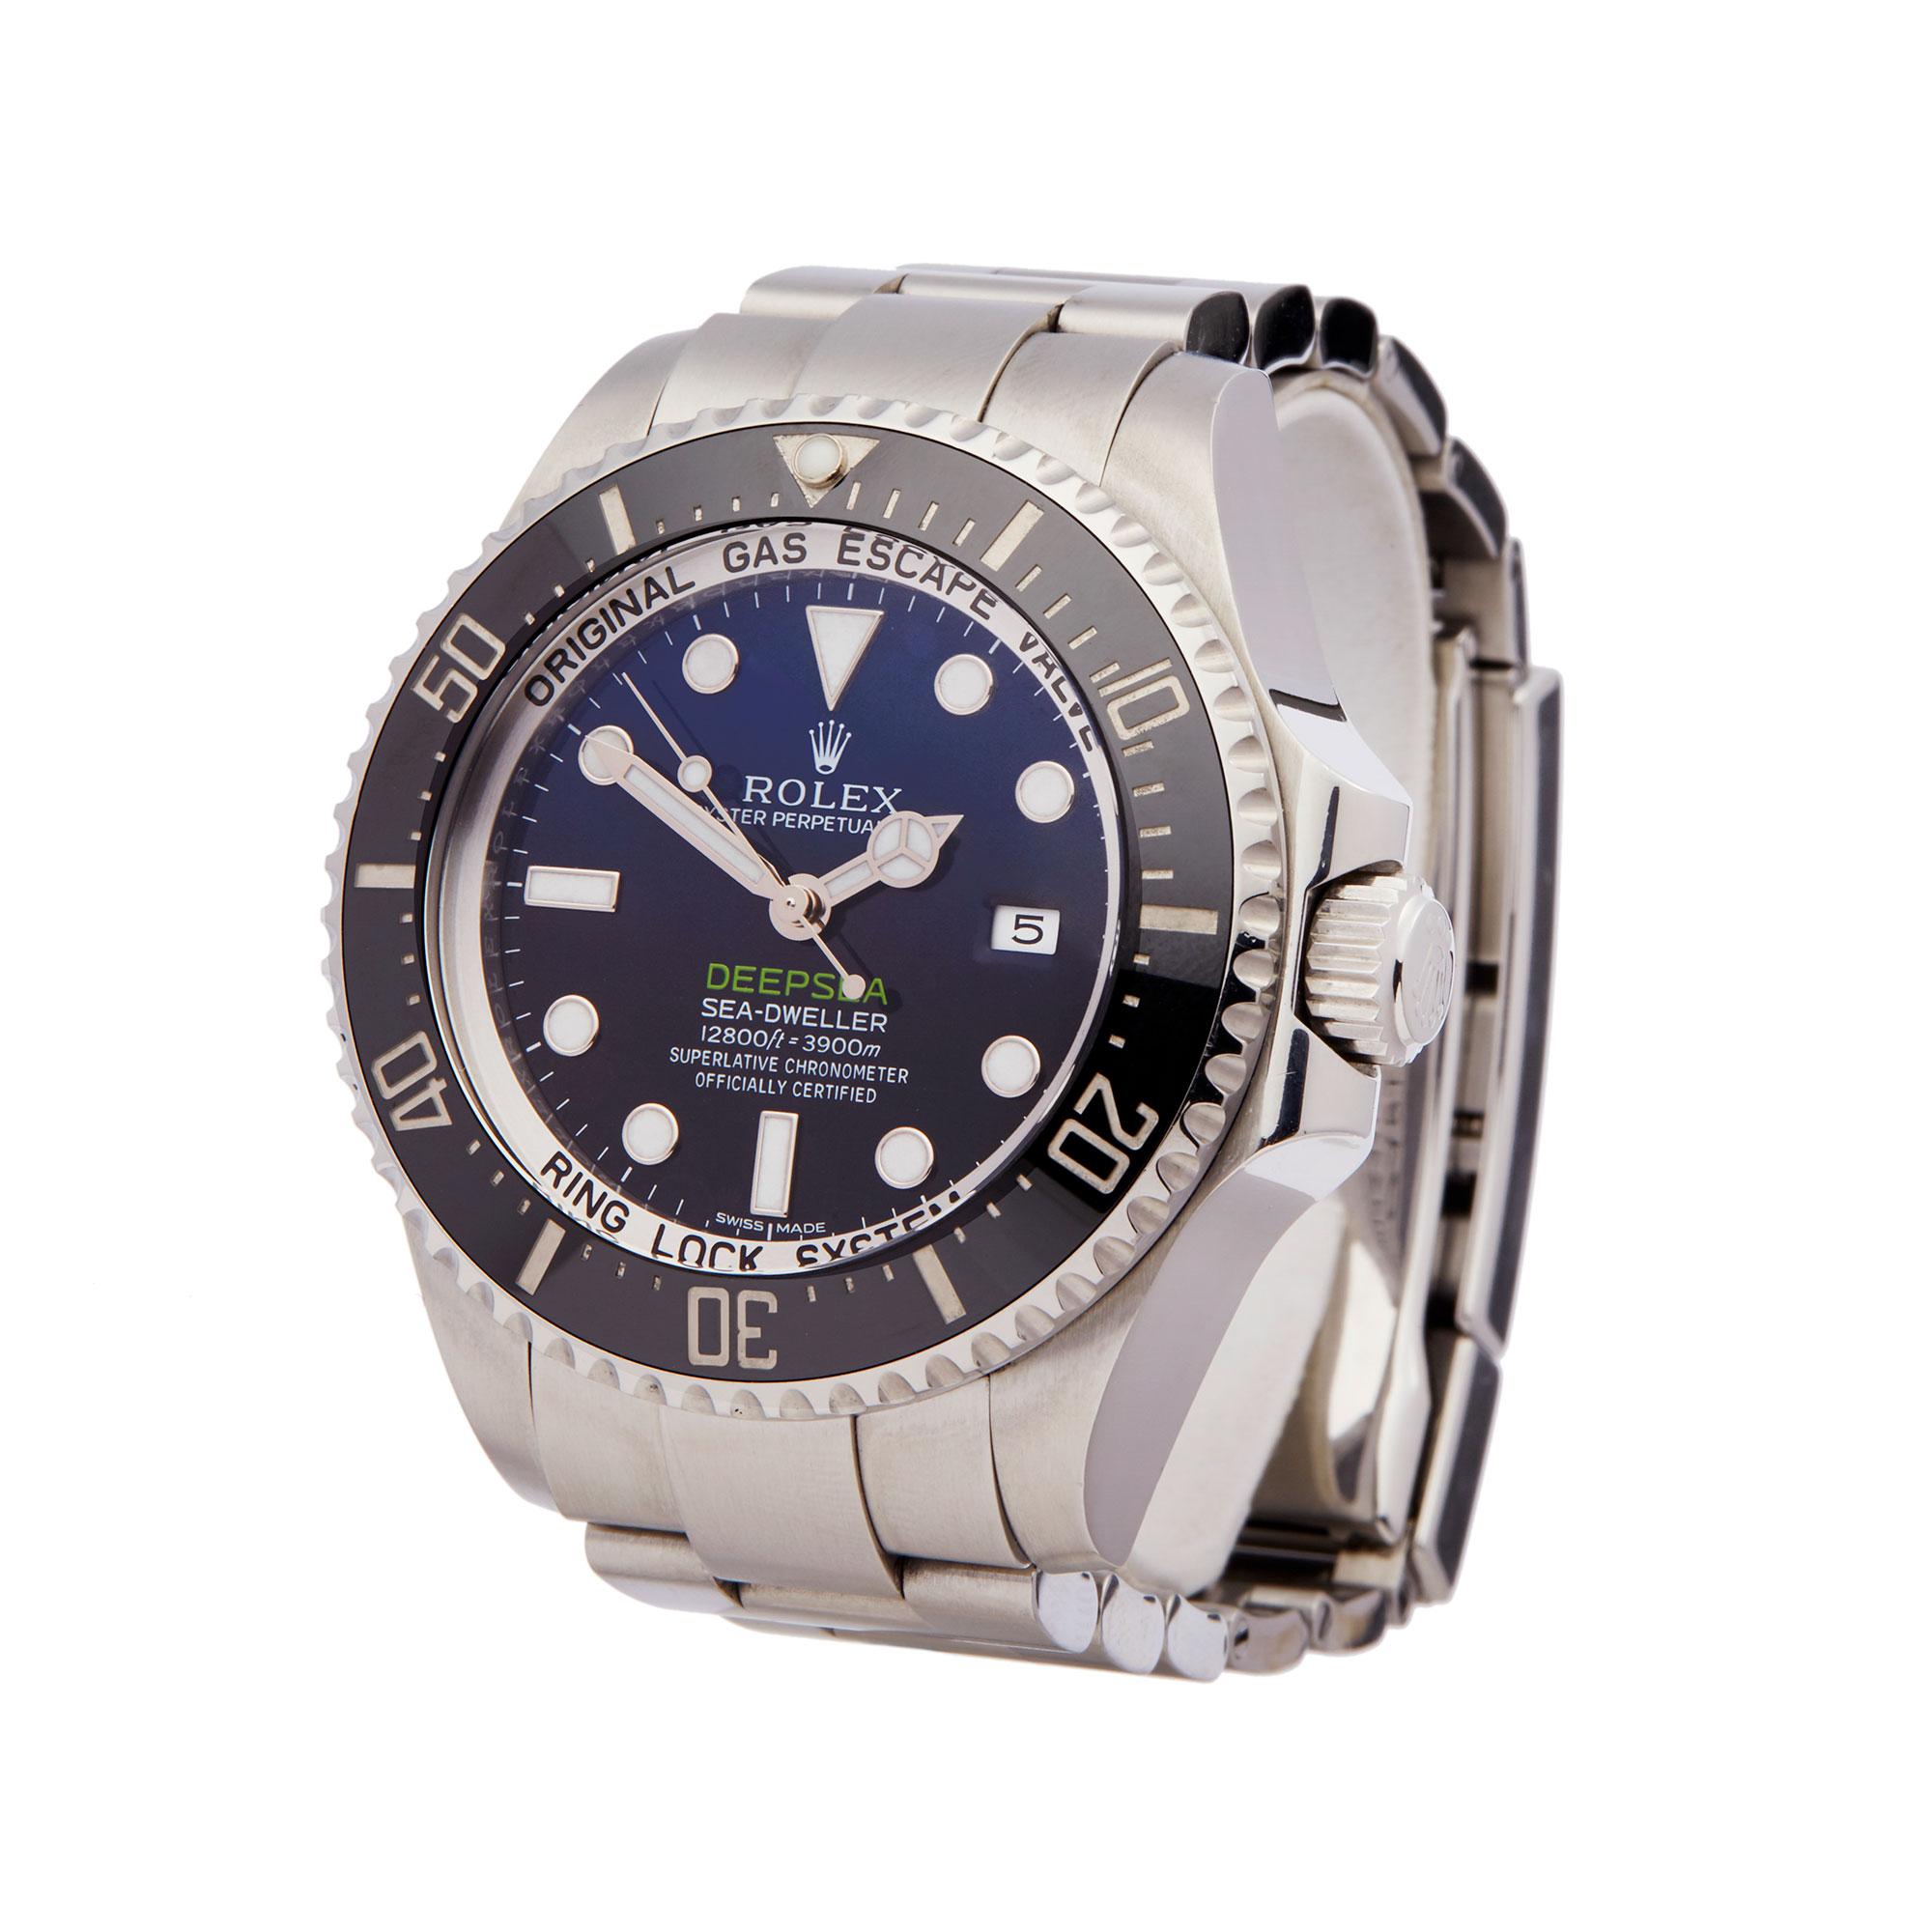 Ref: W5688
Manufacturer: Rolex
Model: Sea-Dweller Deepsea
Model Ref: 116660
Age: 16th March 2016
Gender: Mens
Complete With: Box, Manuals & Guarantee
Dial: Blue
Glass: Sapphire Crystal
Movement: Automatic
Water Resistance: To Manufacturers